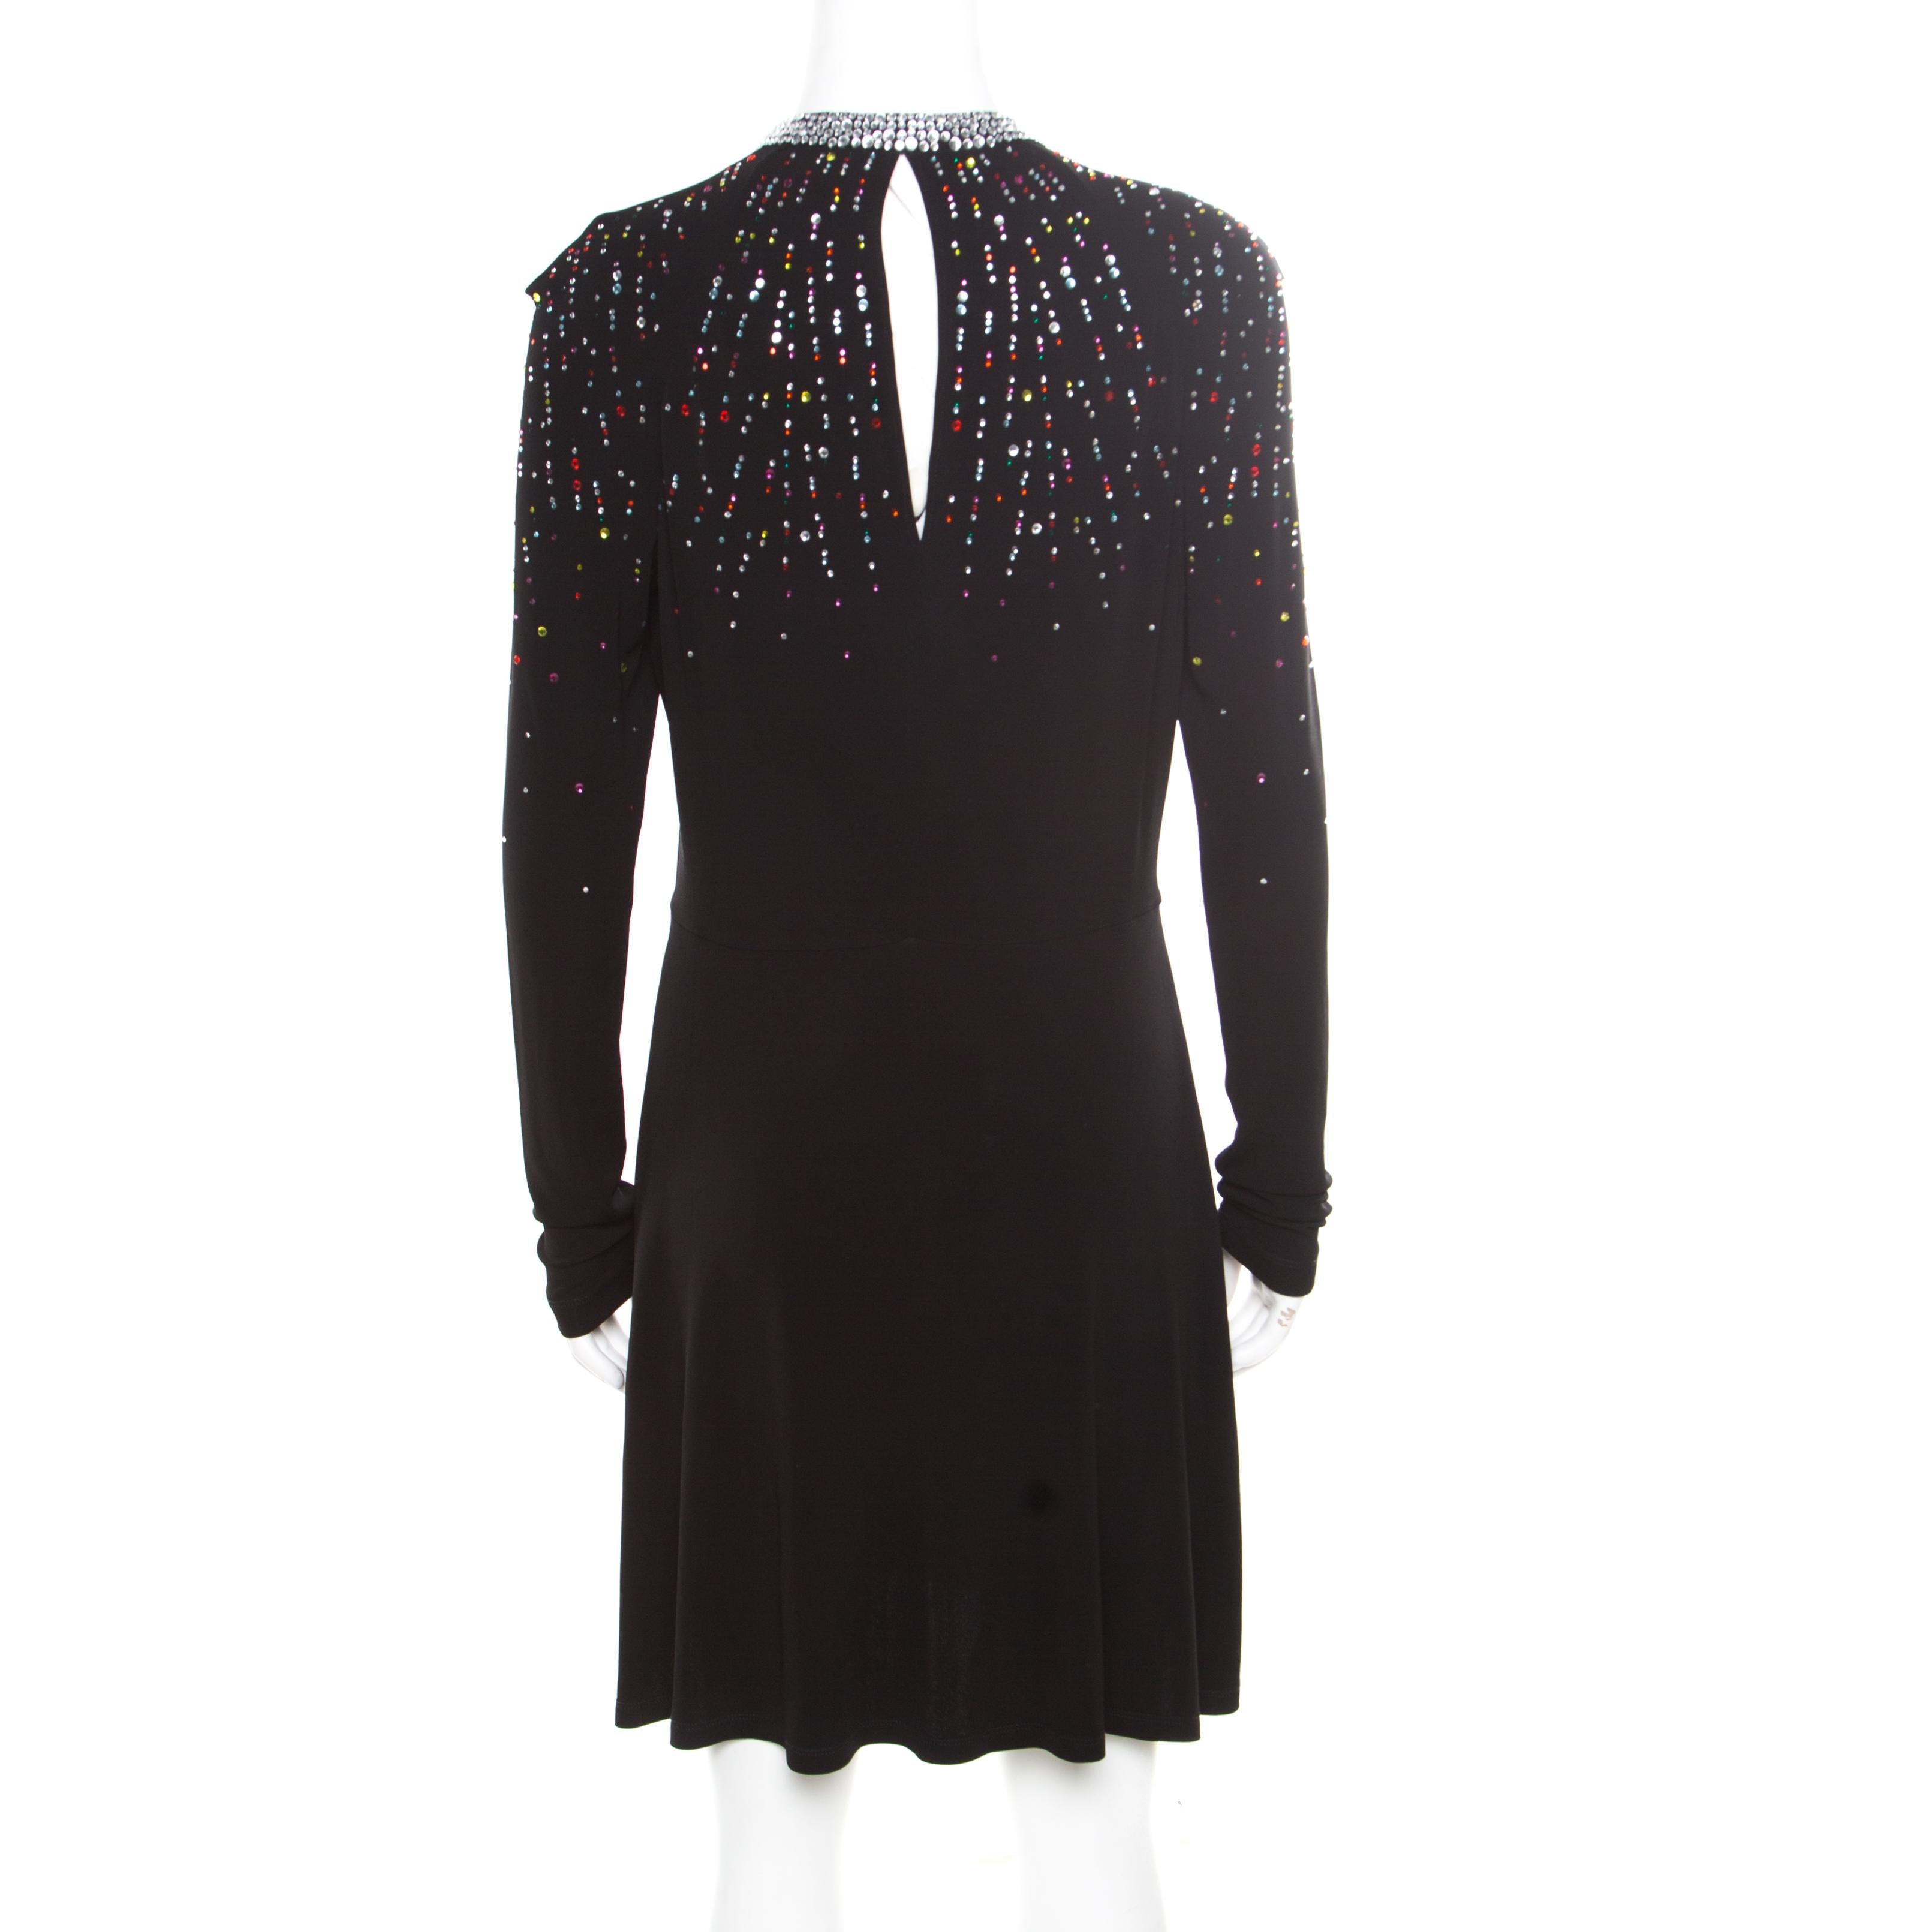 This gorgeous dress from Just Cavalli deserves to be worn by a diva like you! The black knit creation is made of a viscose blend and features a flattering feminine silhouette. It is artistically embellished with multicolour crystals and flaunts a